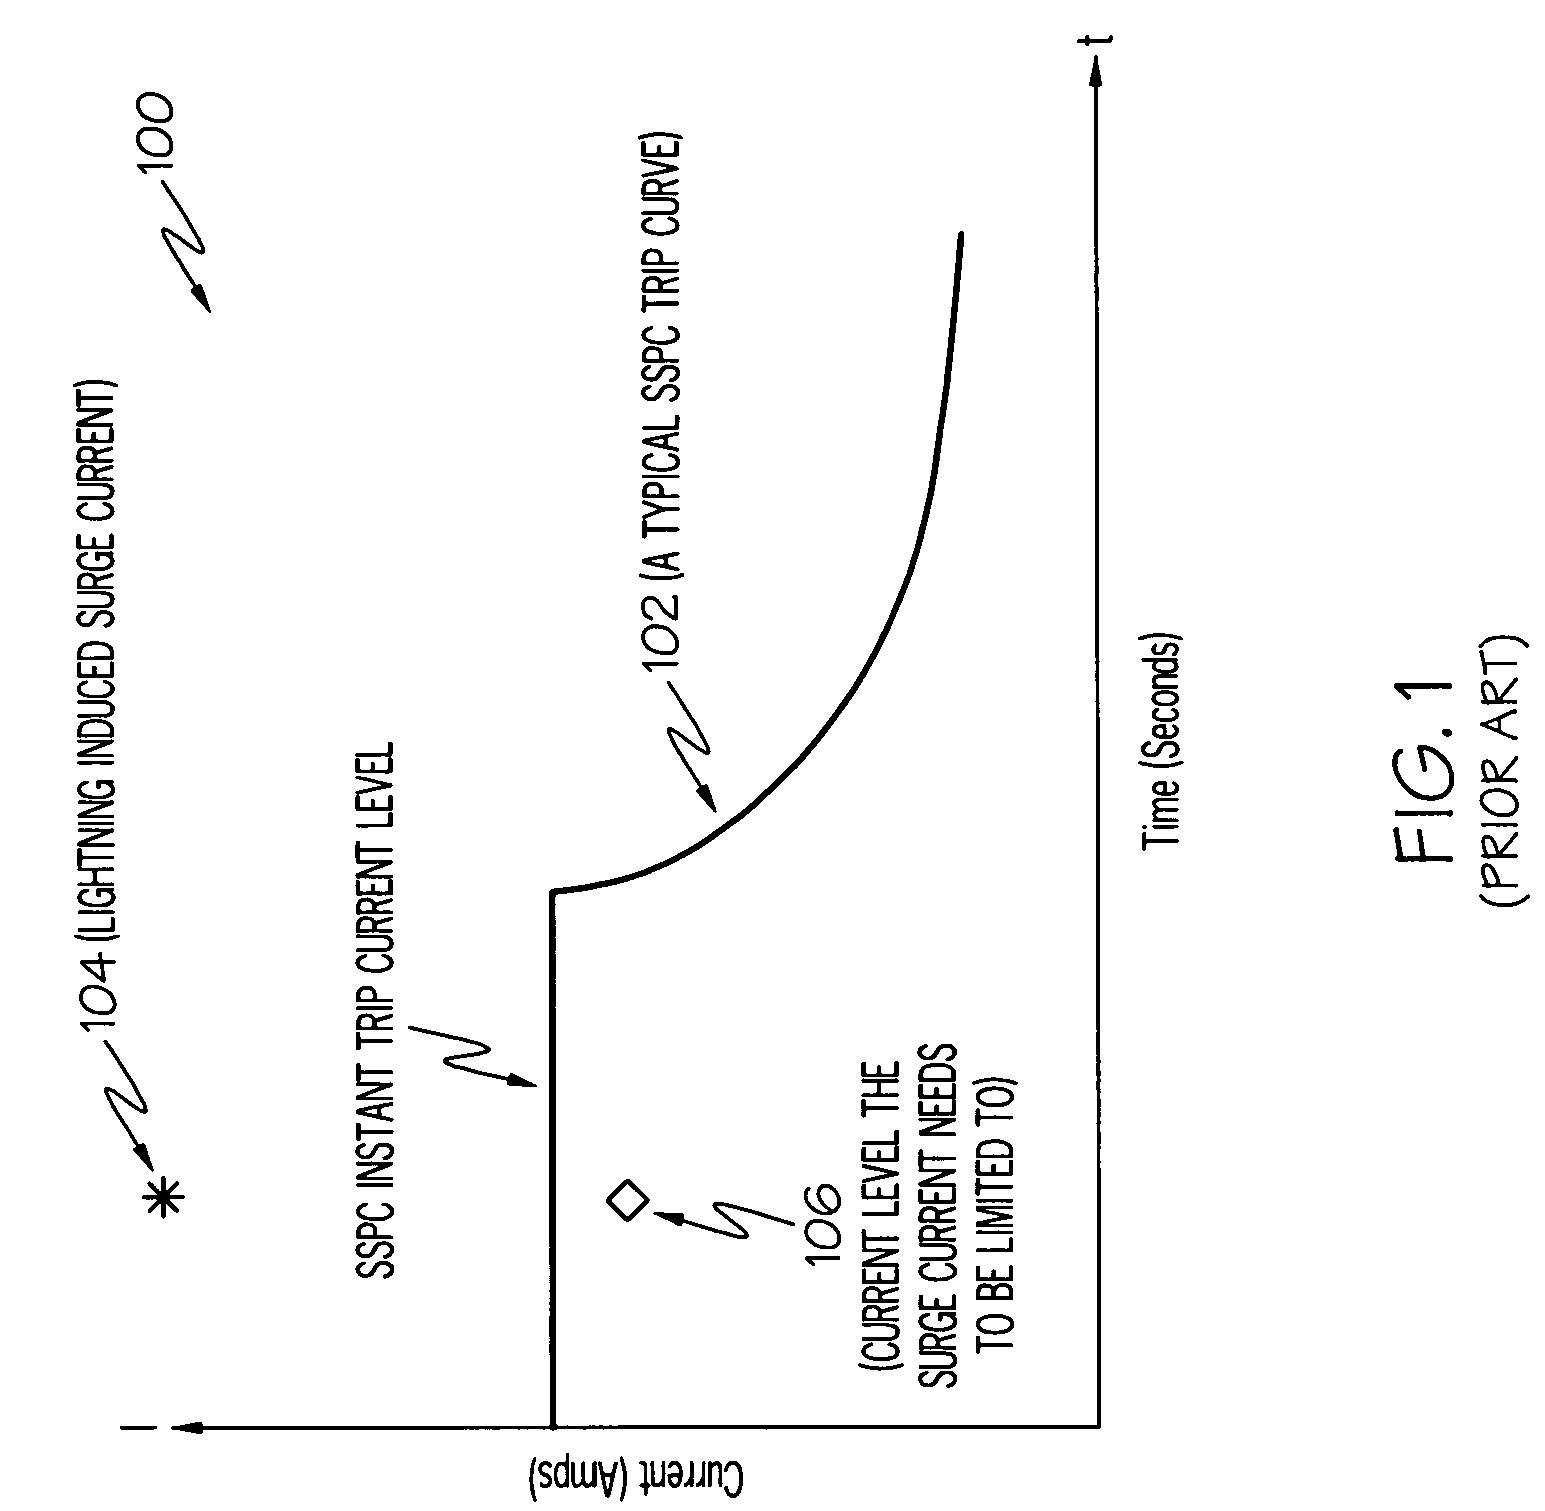 Methods of improving the lightning immunity for an SSPC based aircraft electric power distribution system